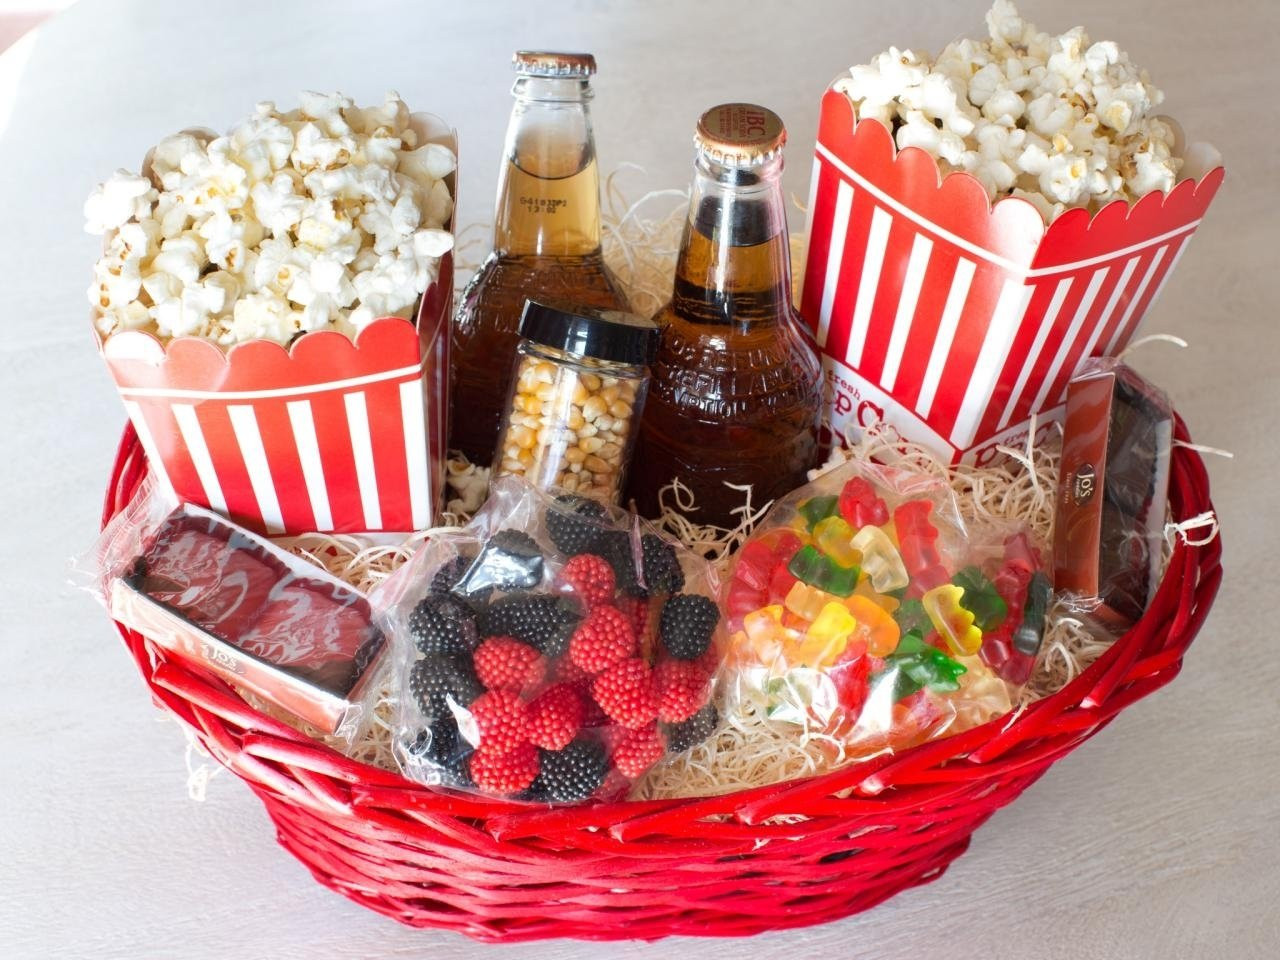 Easy Gift Baskets Ideas
 10 Unique Movie Themed Gift Basket Ideas 2020